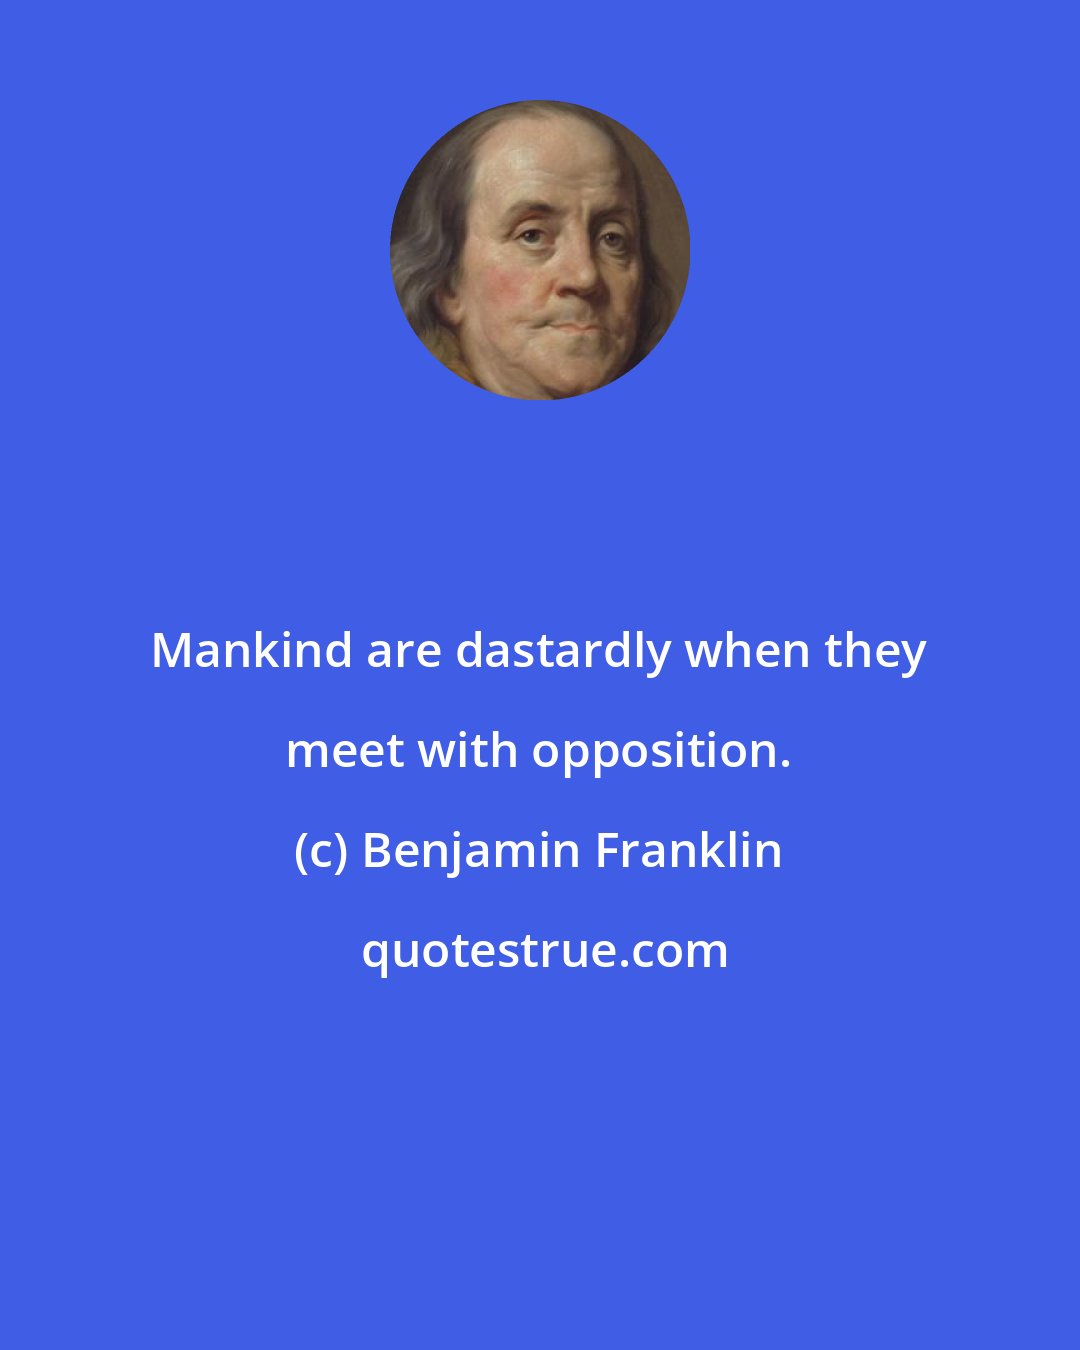 Benjamin Franklin: Mankind are dastardly when they meet with opposition.